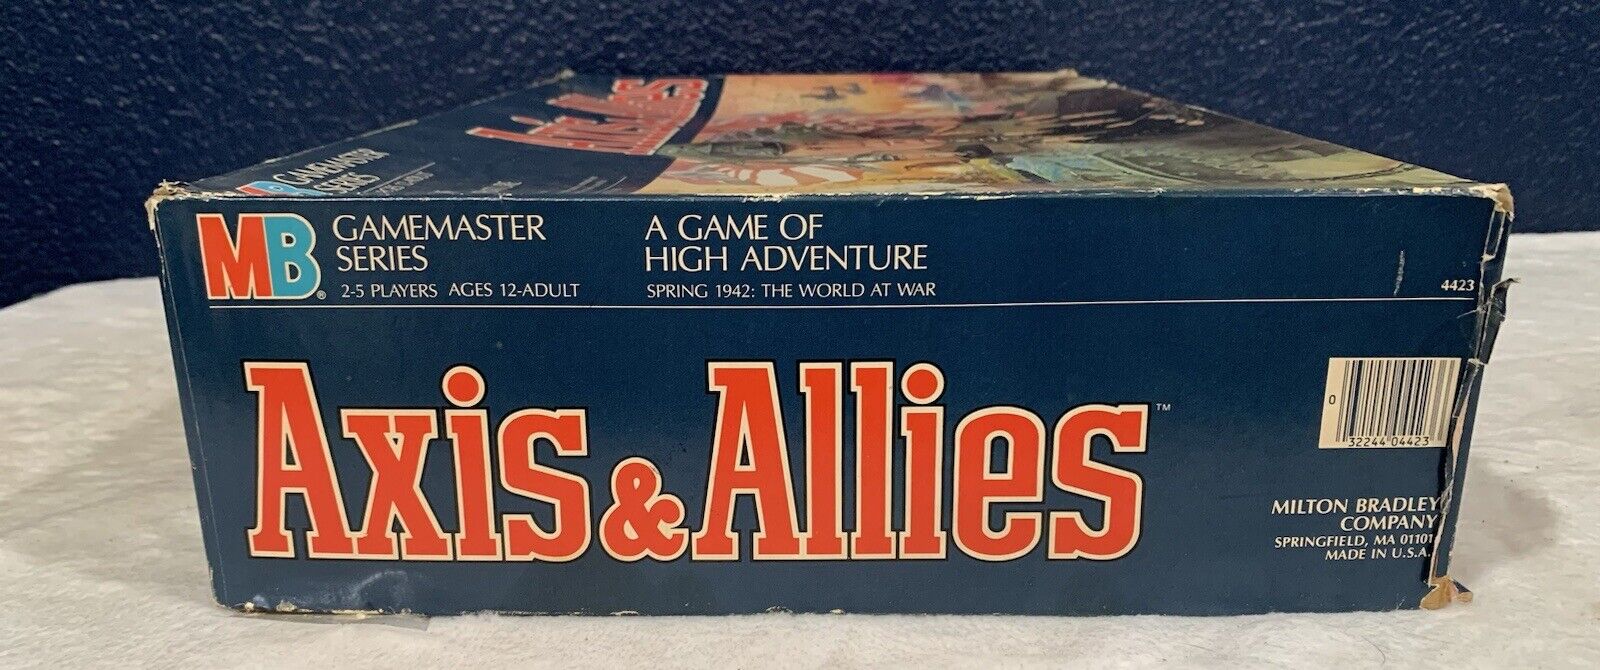 1984 Axis and Allies Game by Milton Bradley Unpunched Complete Open Box Milton Bradley 4423 - фотография #3